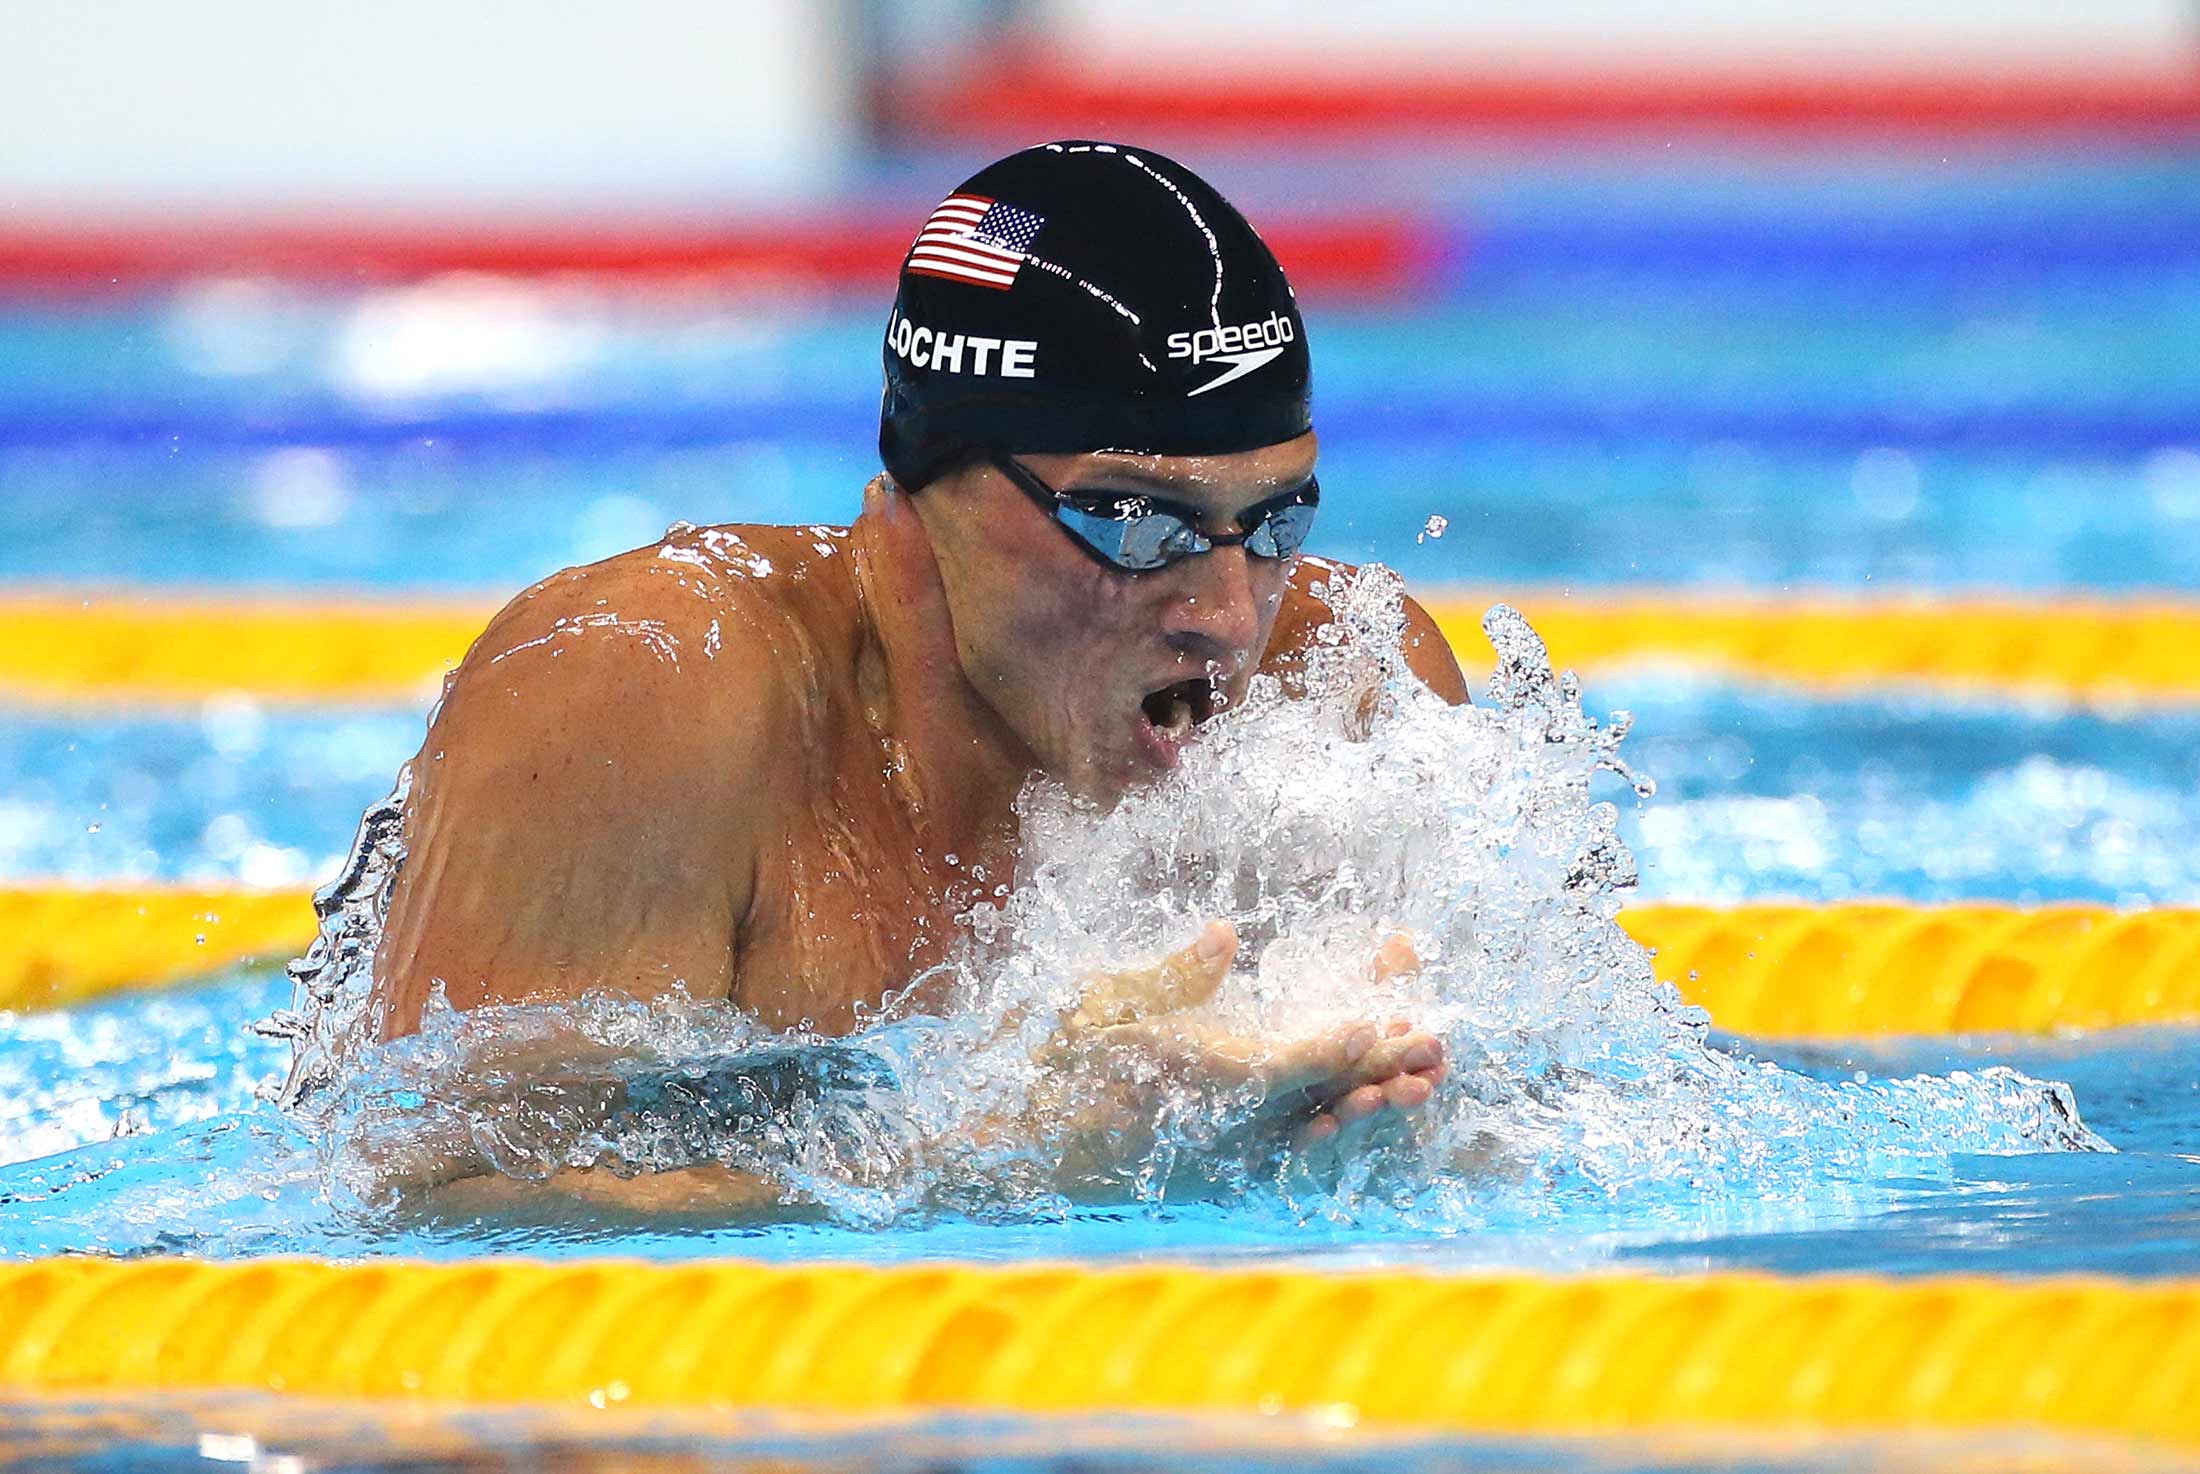 Ryan Lochte competes in the Men's 200m Individual Medley semifinal on Aug. 10, in Rio de Janeiro, Brazil.
